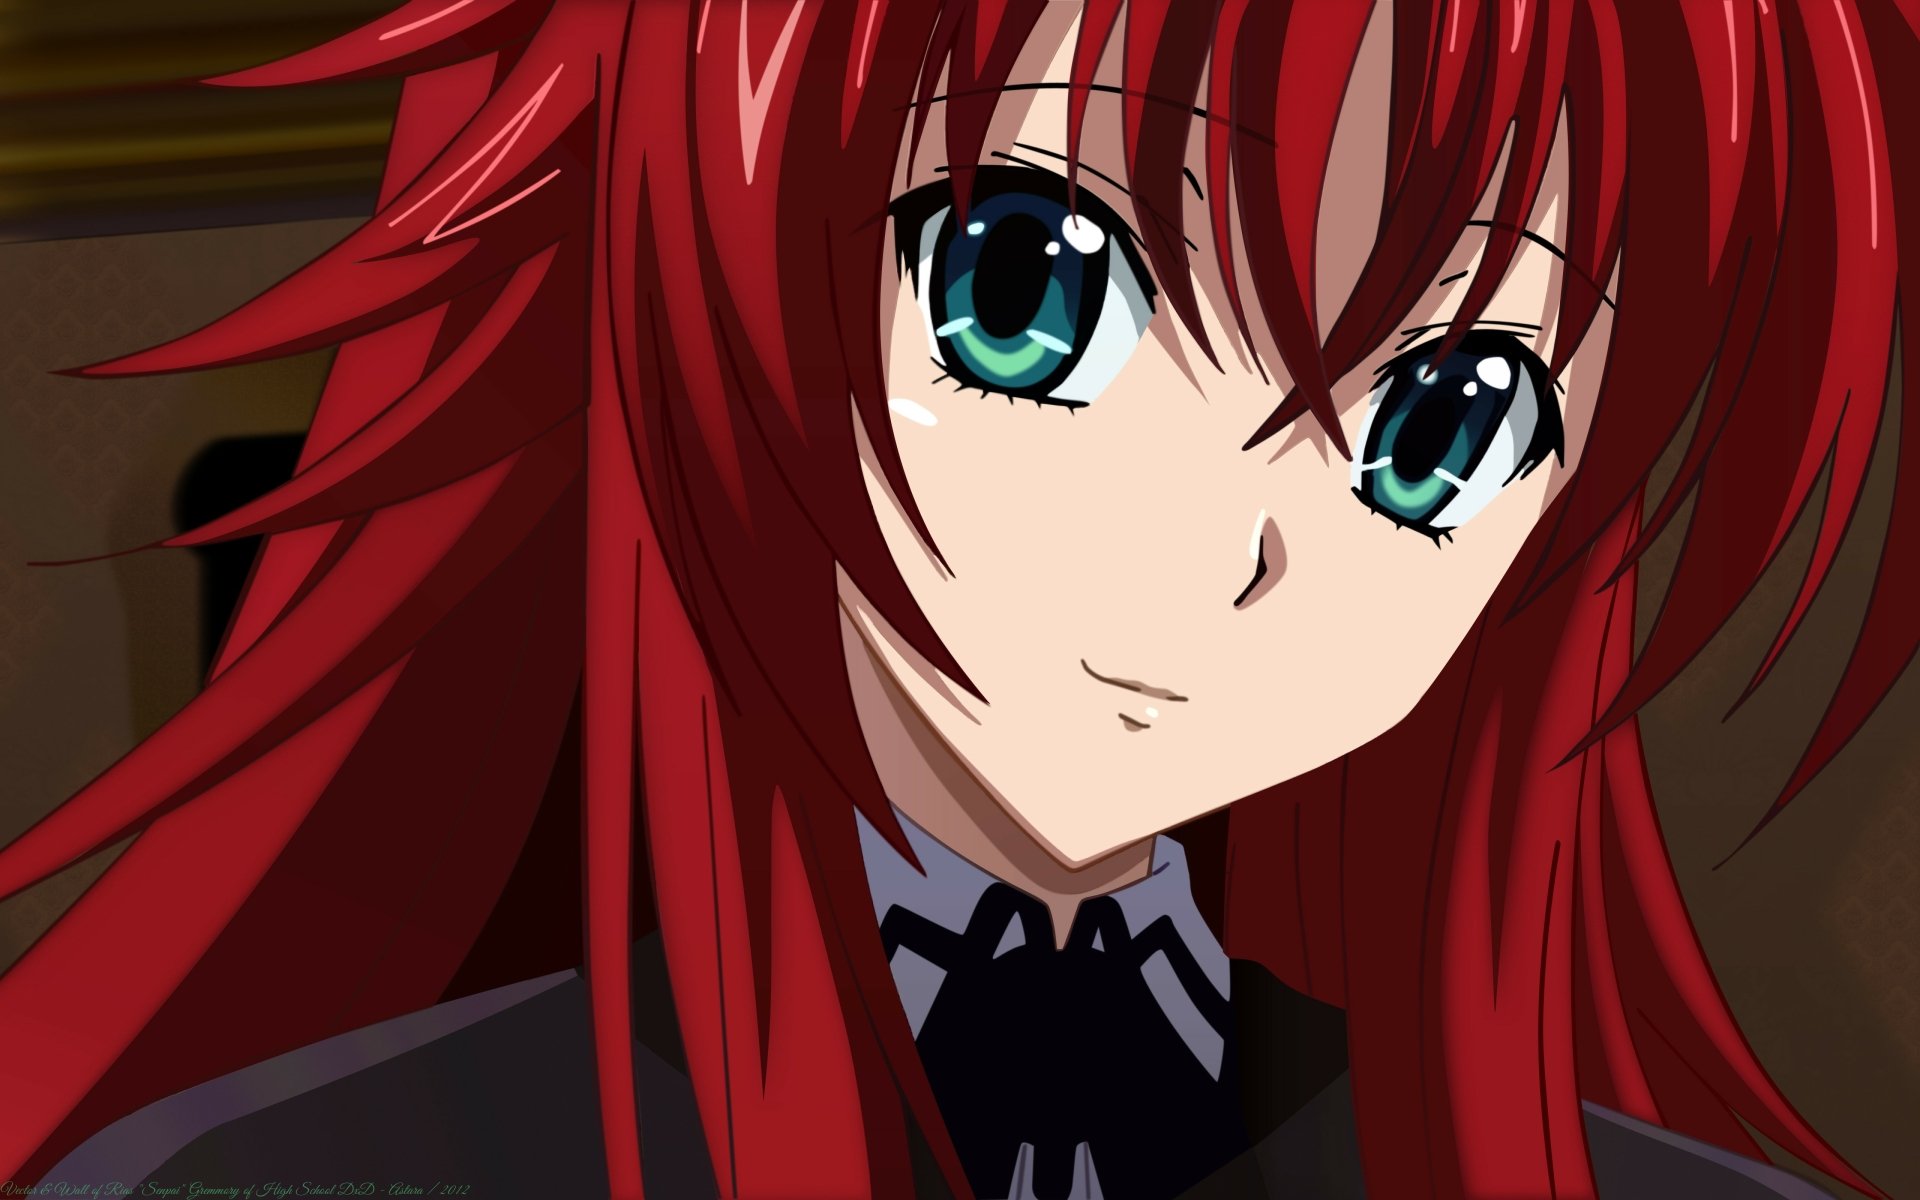 7. Rias Gremory from High School DxD - wide 3